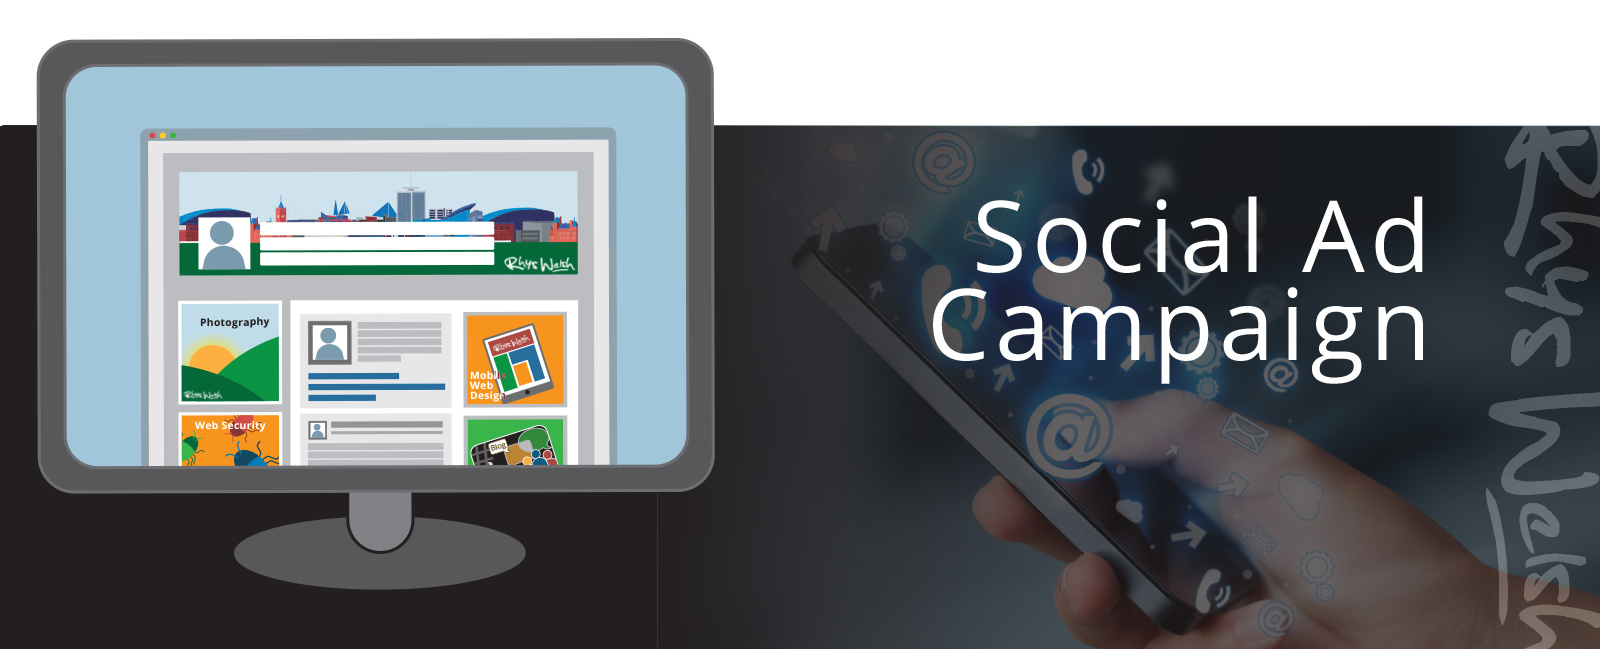 Social-Ad-Campaign-for-websites-cardiff